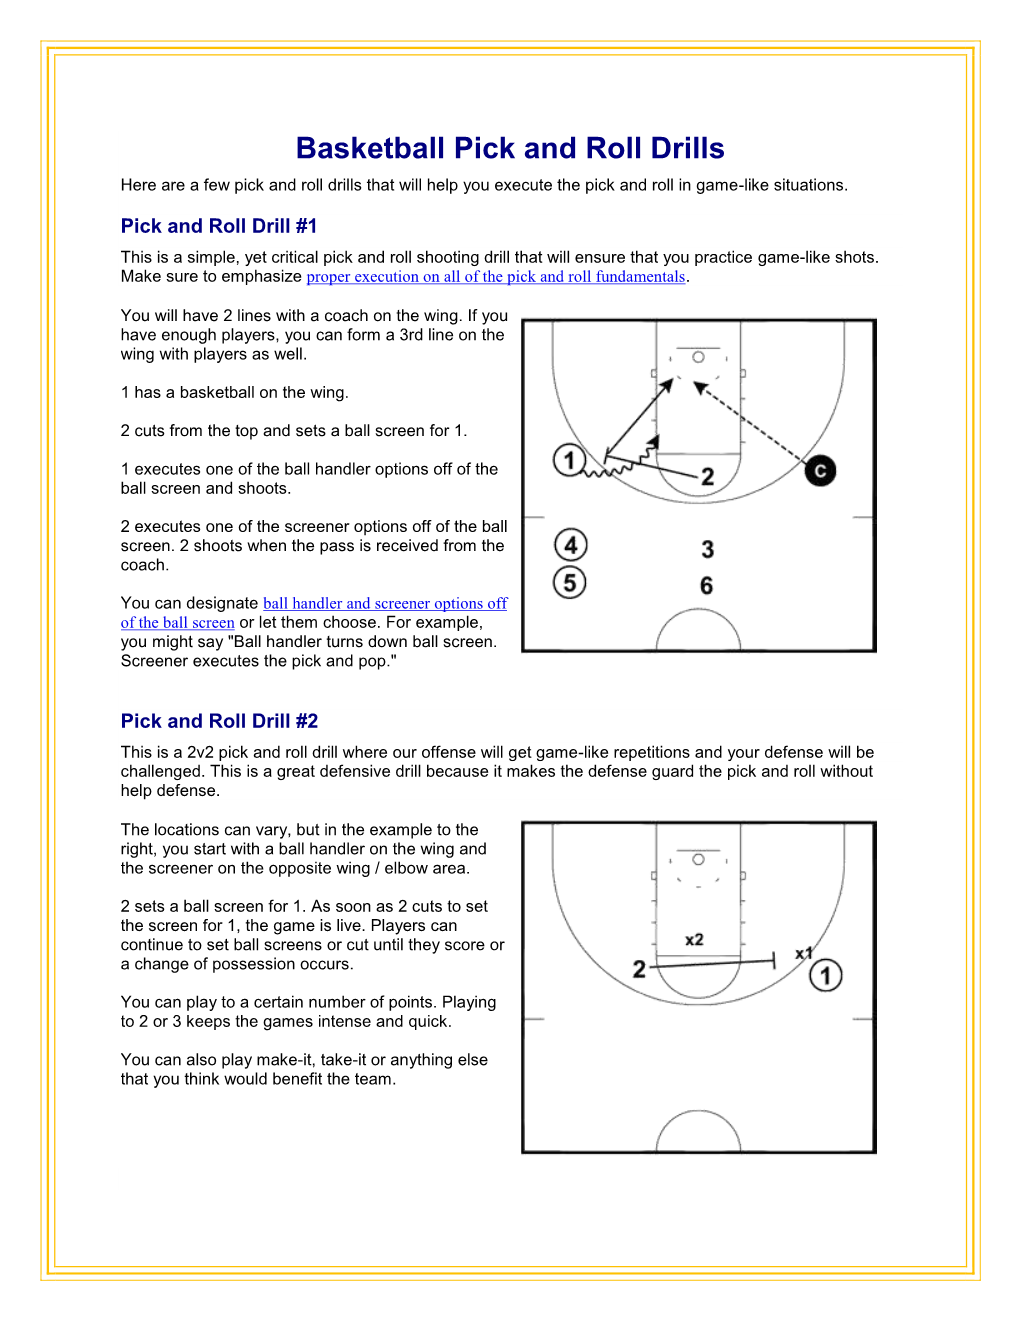 Basketball Pick and Roll Drills Here Are a Few Pick and Roll Drills That Will Help You Execute the Pick and Roll in Game-Like Situations